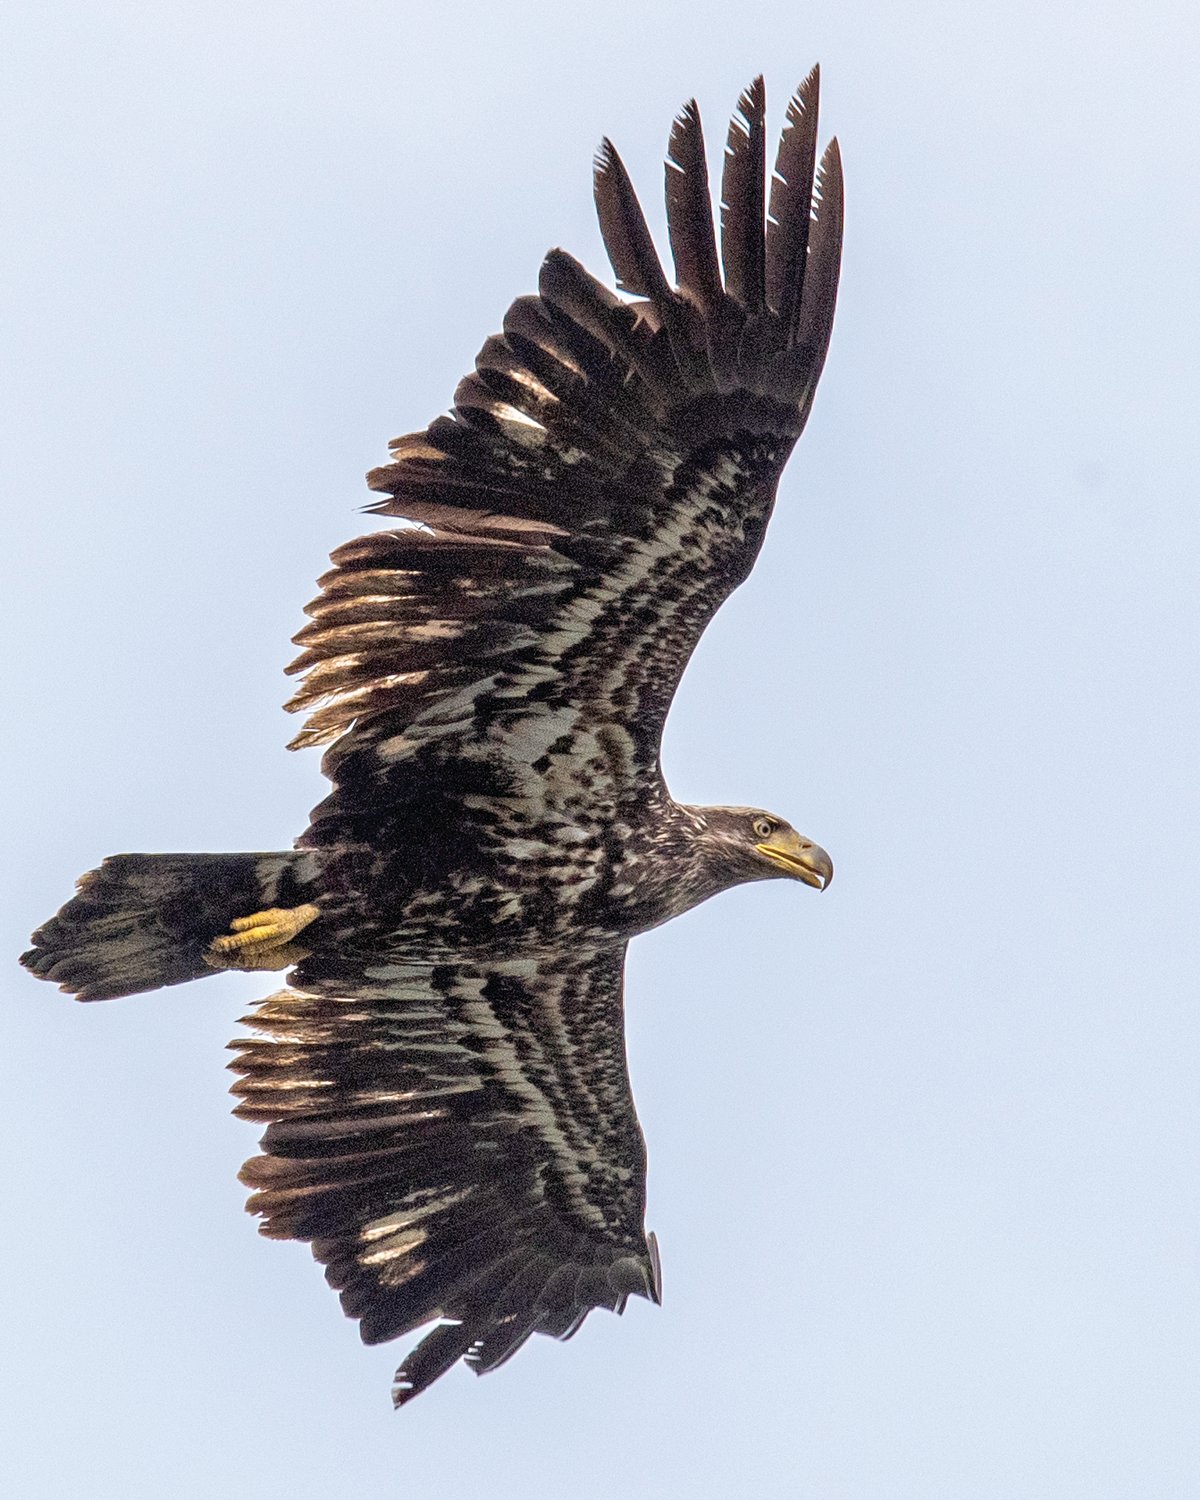 A young bald eagle flies above Fort Borst Park in Centralia on Wednesday afternoon.